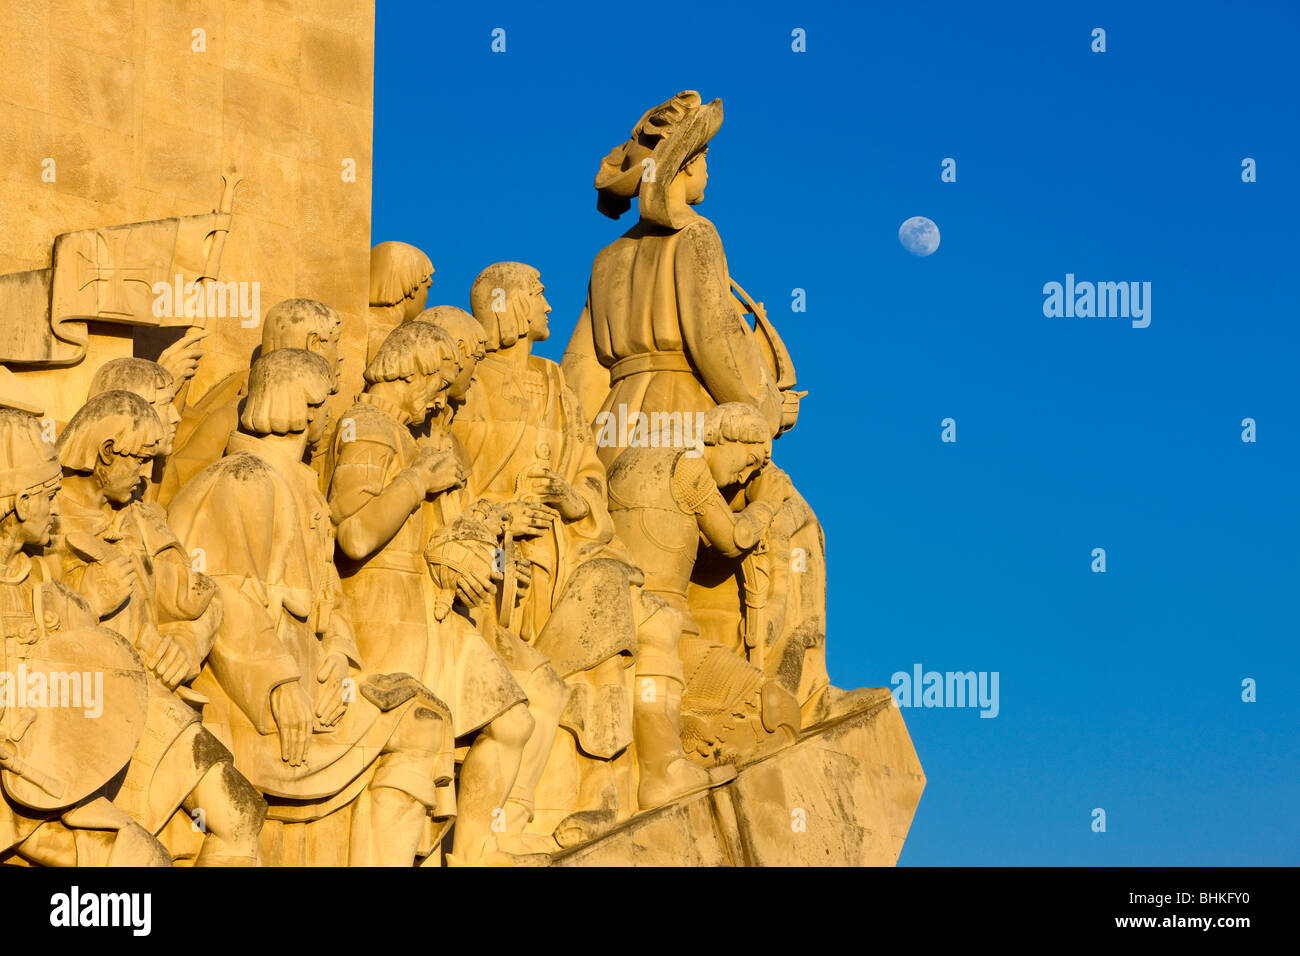 Portugal Lisbon Monument to the discoveries with moon in sky in late evening light Stock Photo